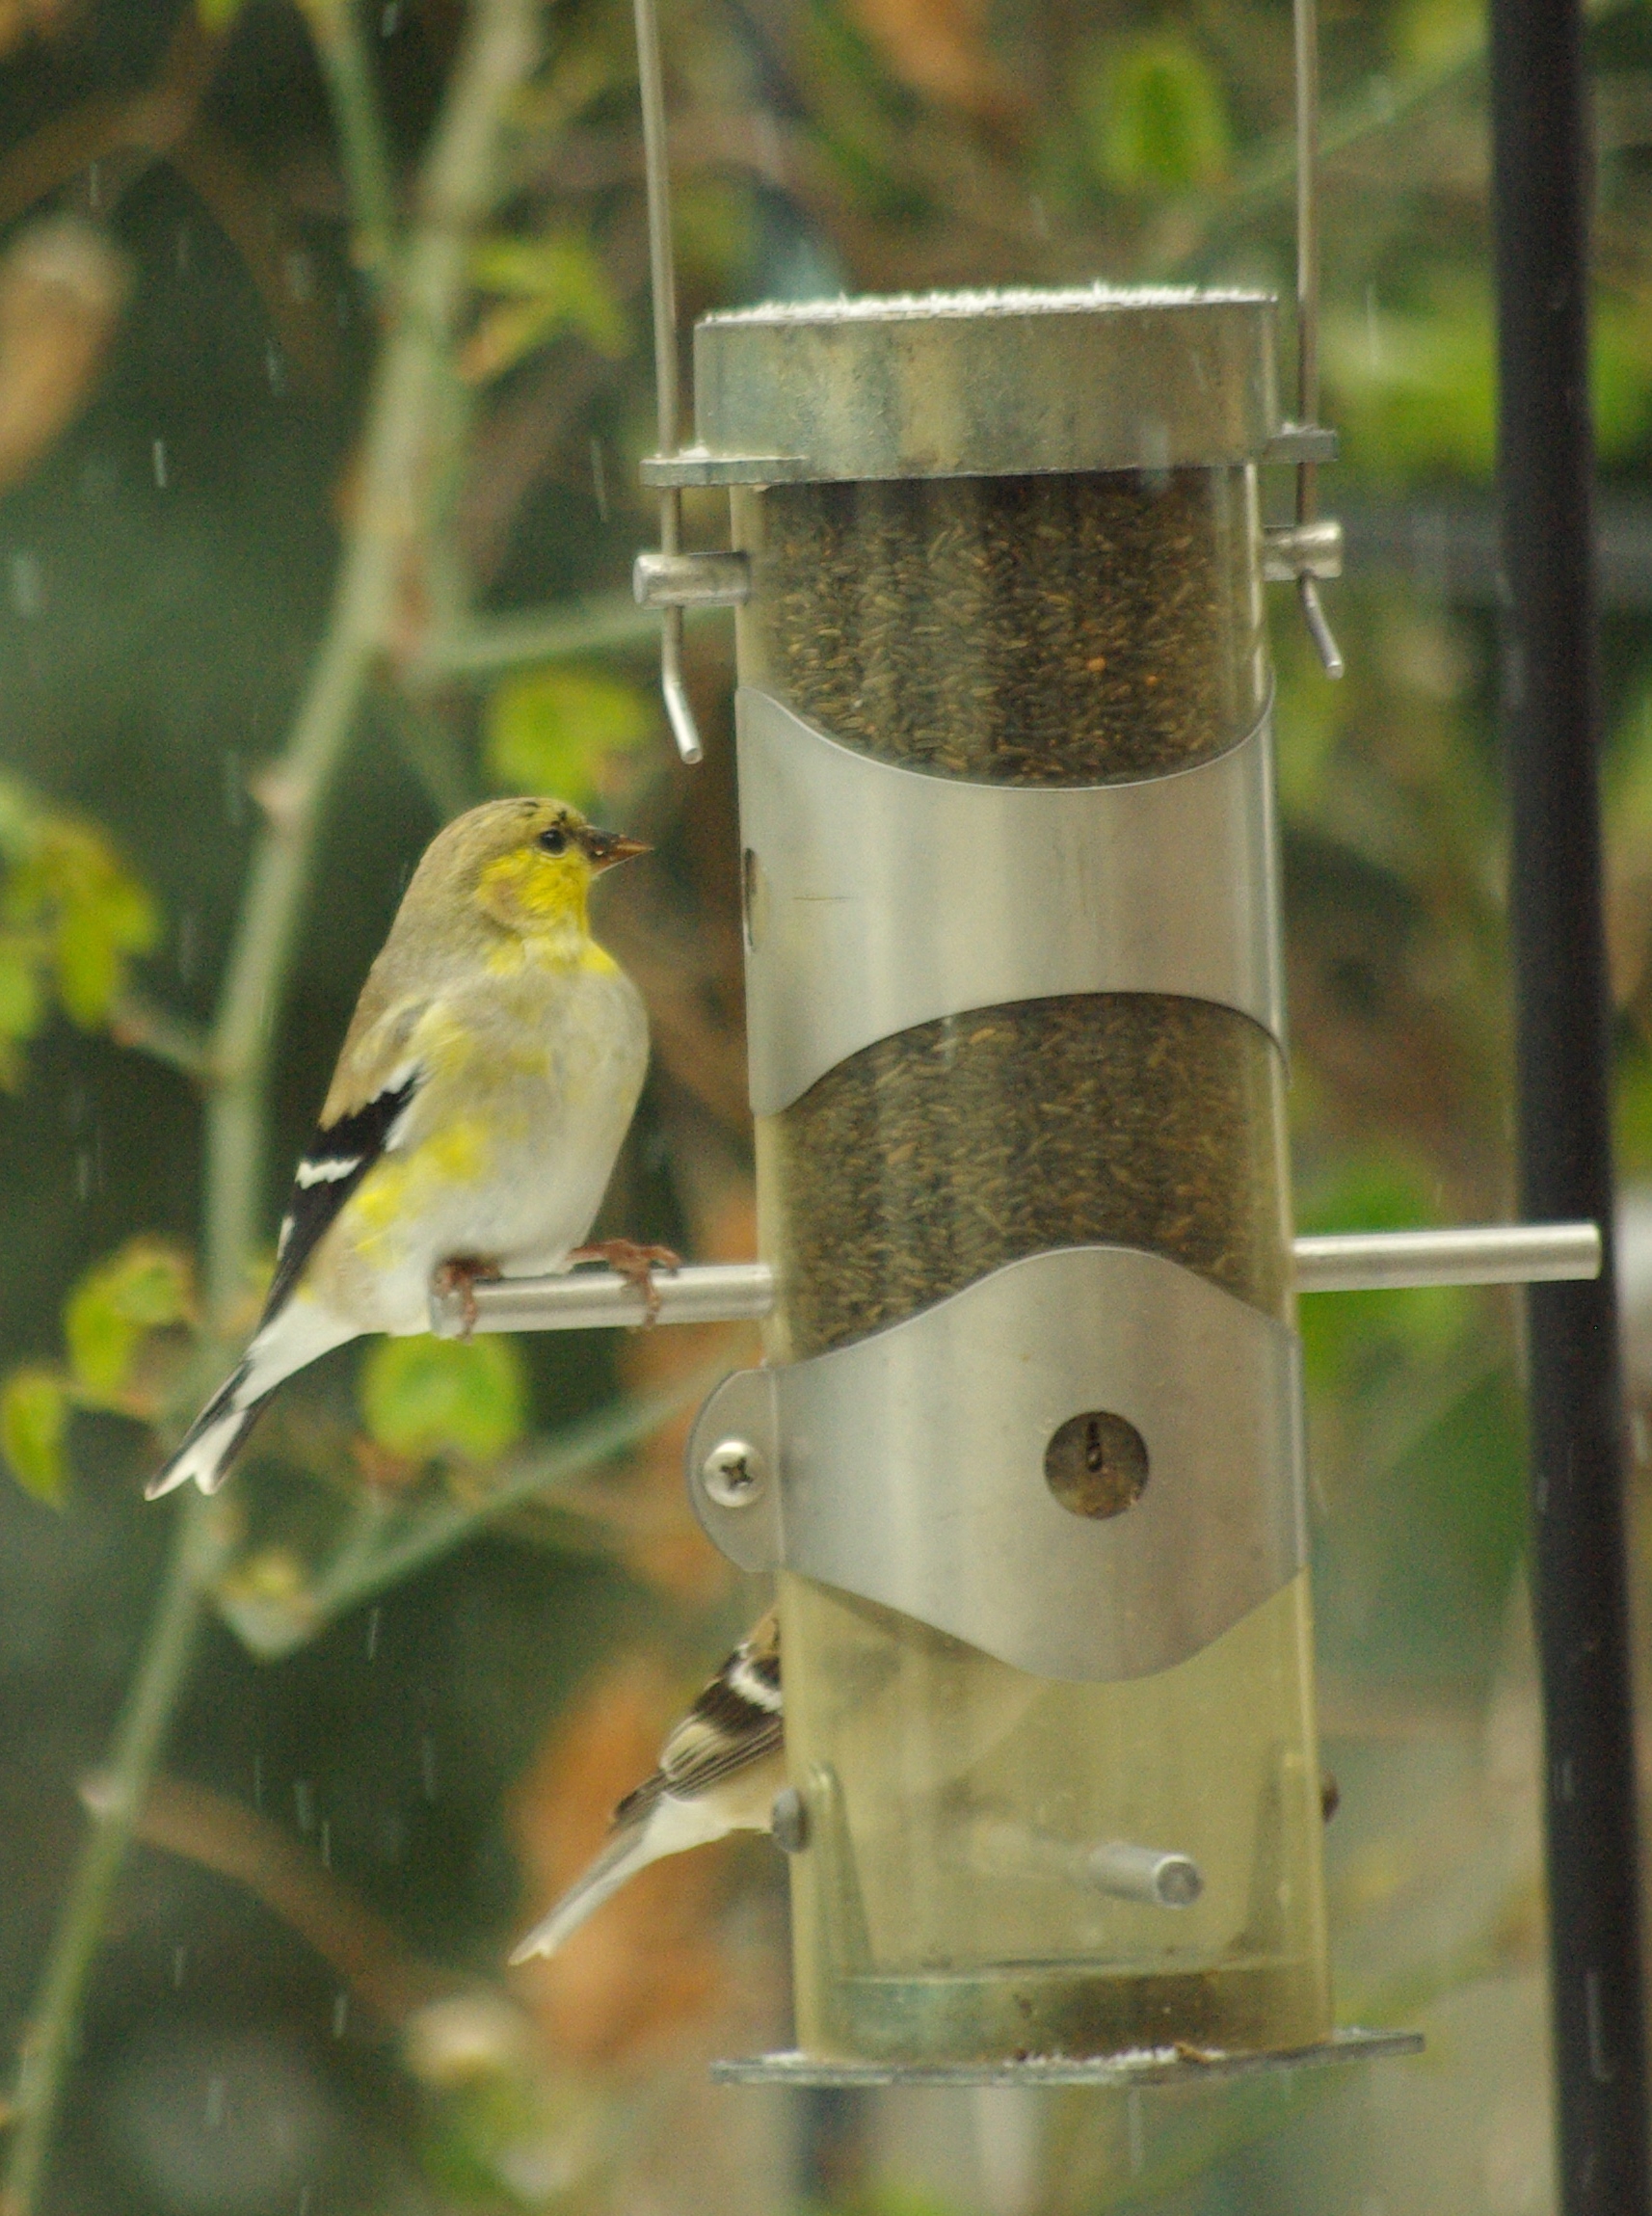 We get the goldfinches in winter, with their winter colors; some of the males may be anticipating spring a bit.